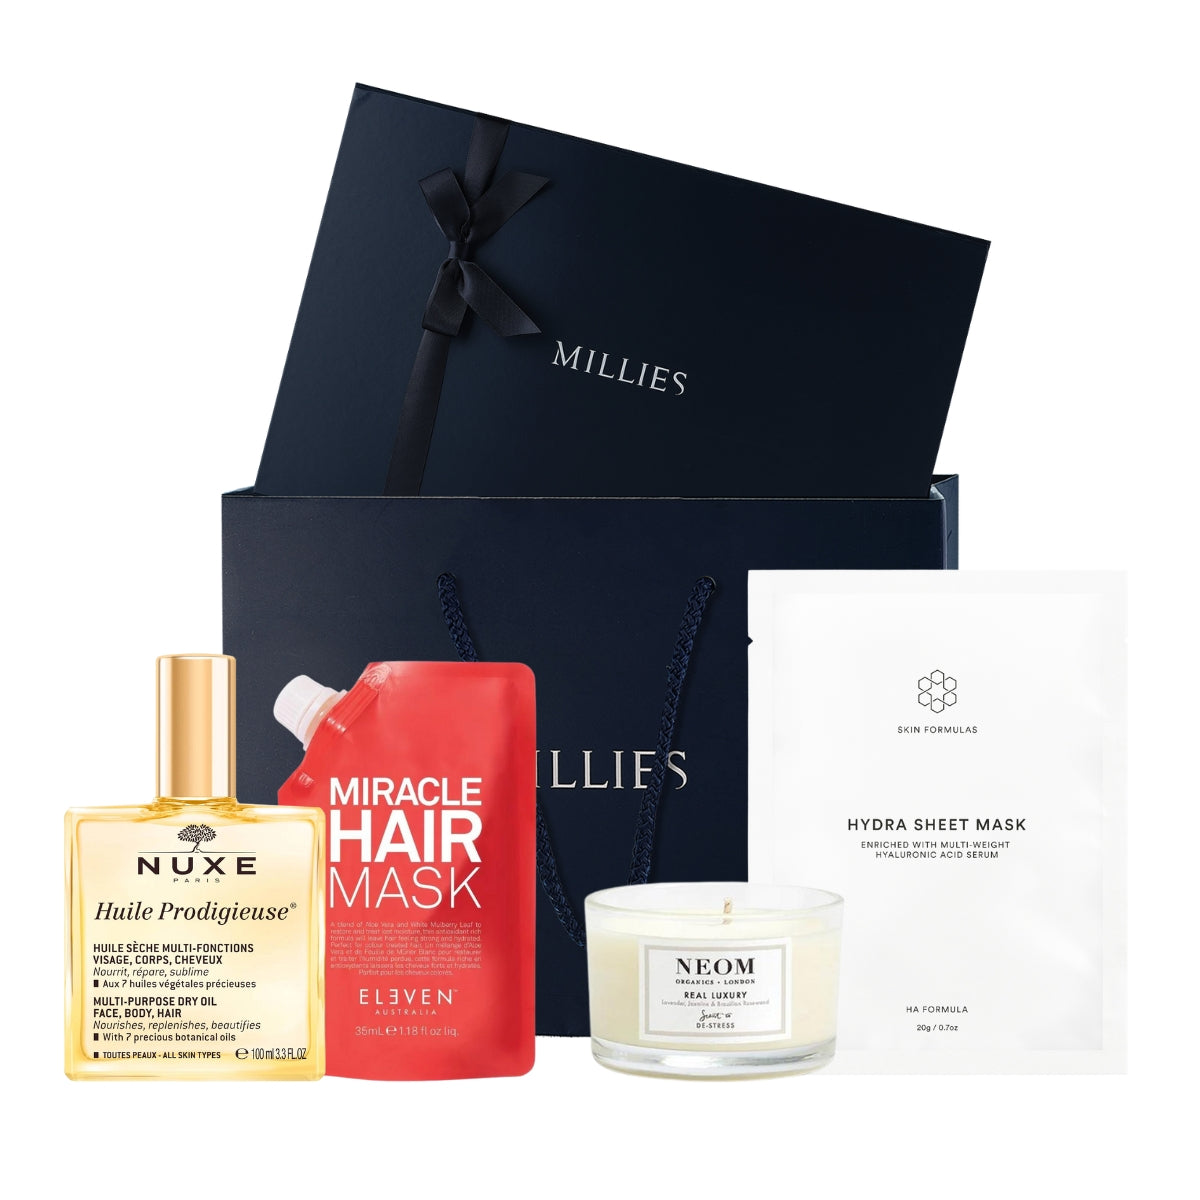 Millies Bridesmaid Your Turn to Relax Gift Box